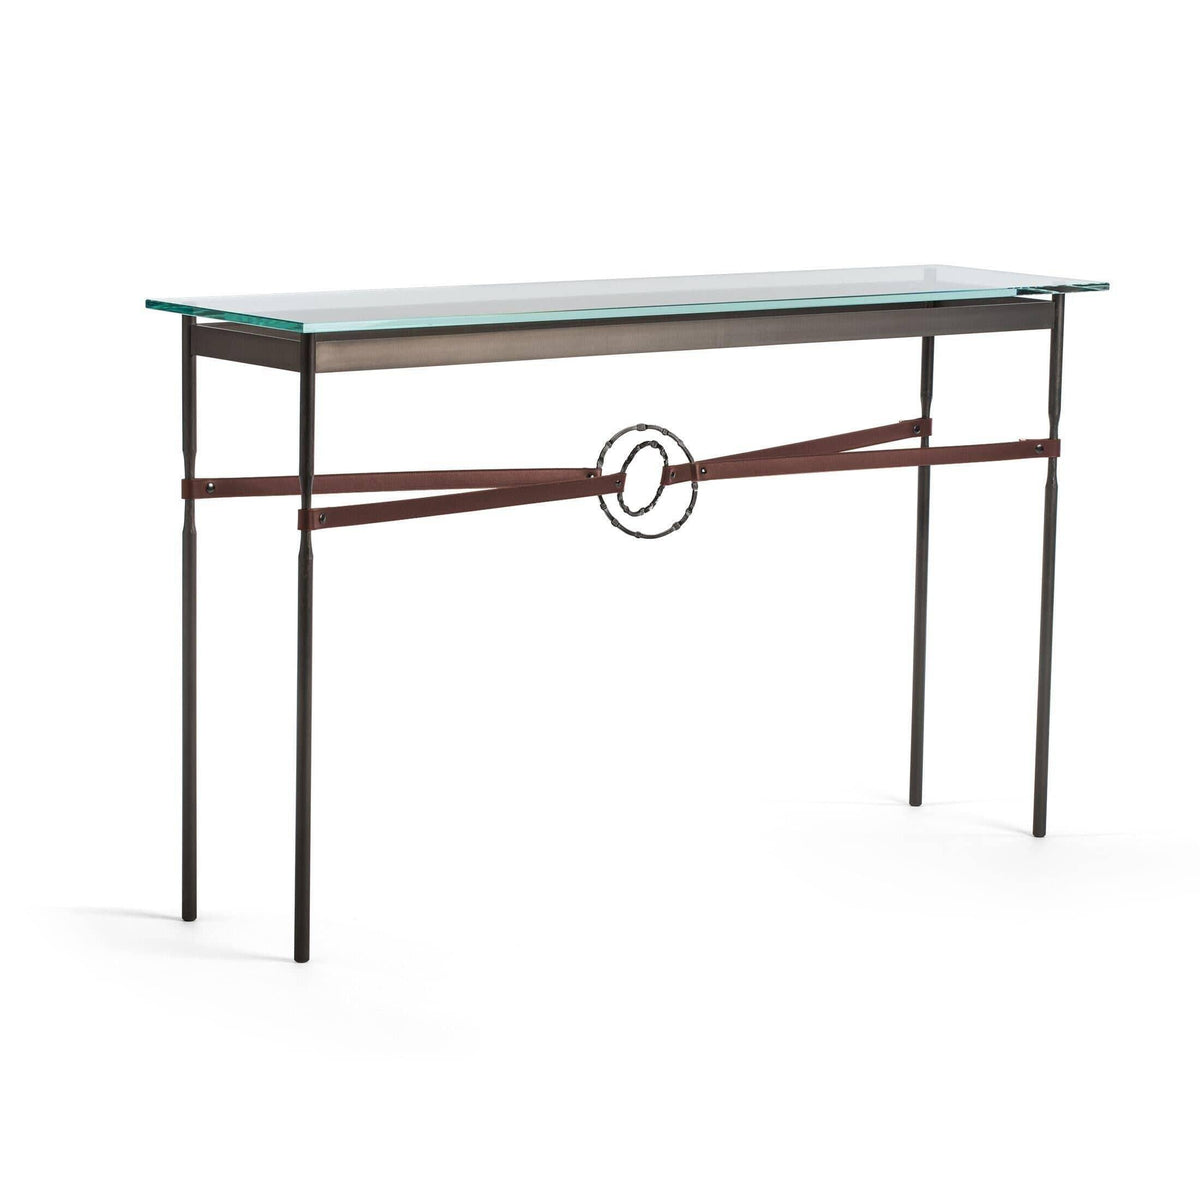 Hubbardton Forge - Equus Brown Leather Console Table - 750118-07-07-LB-VA0714 | Montreal Lighting & Hardware